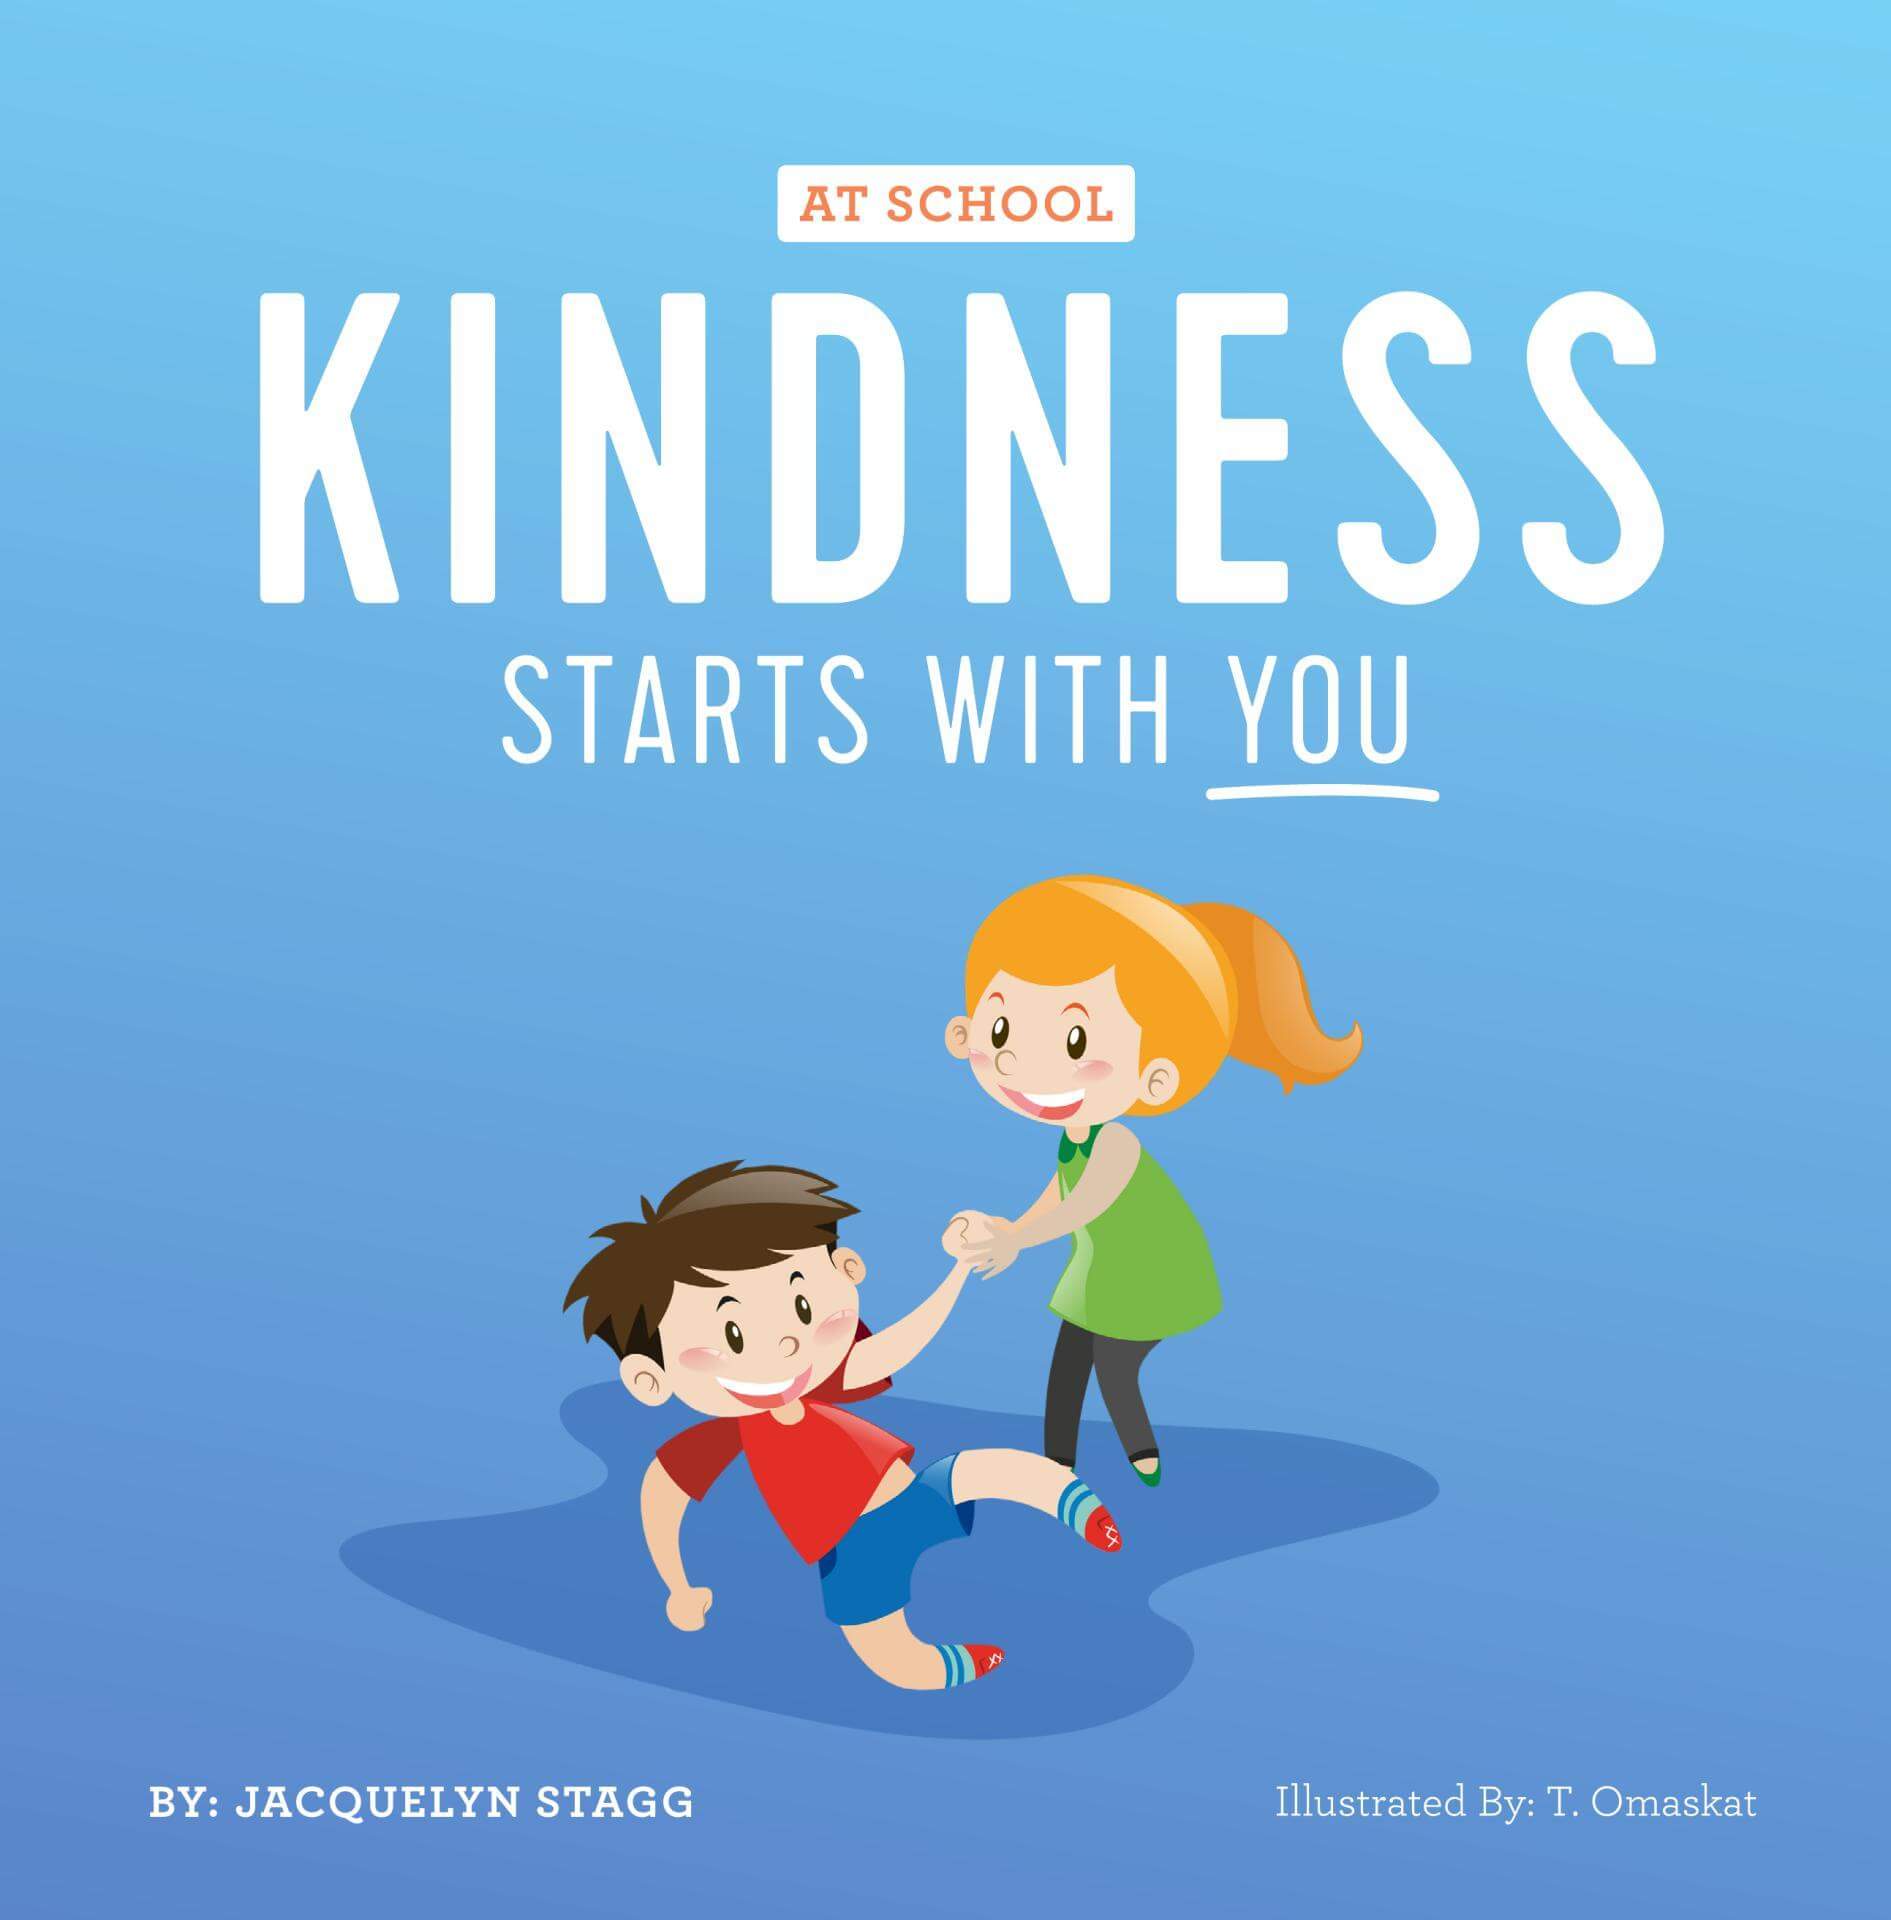 Kindness Starts With You, by Jacquelyn Stagg 